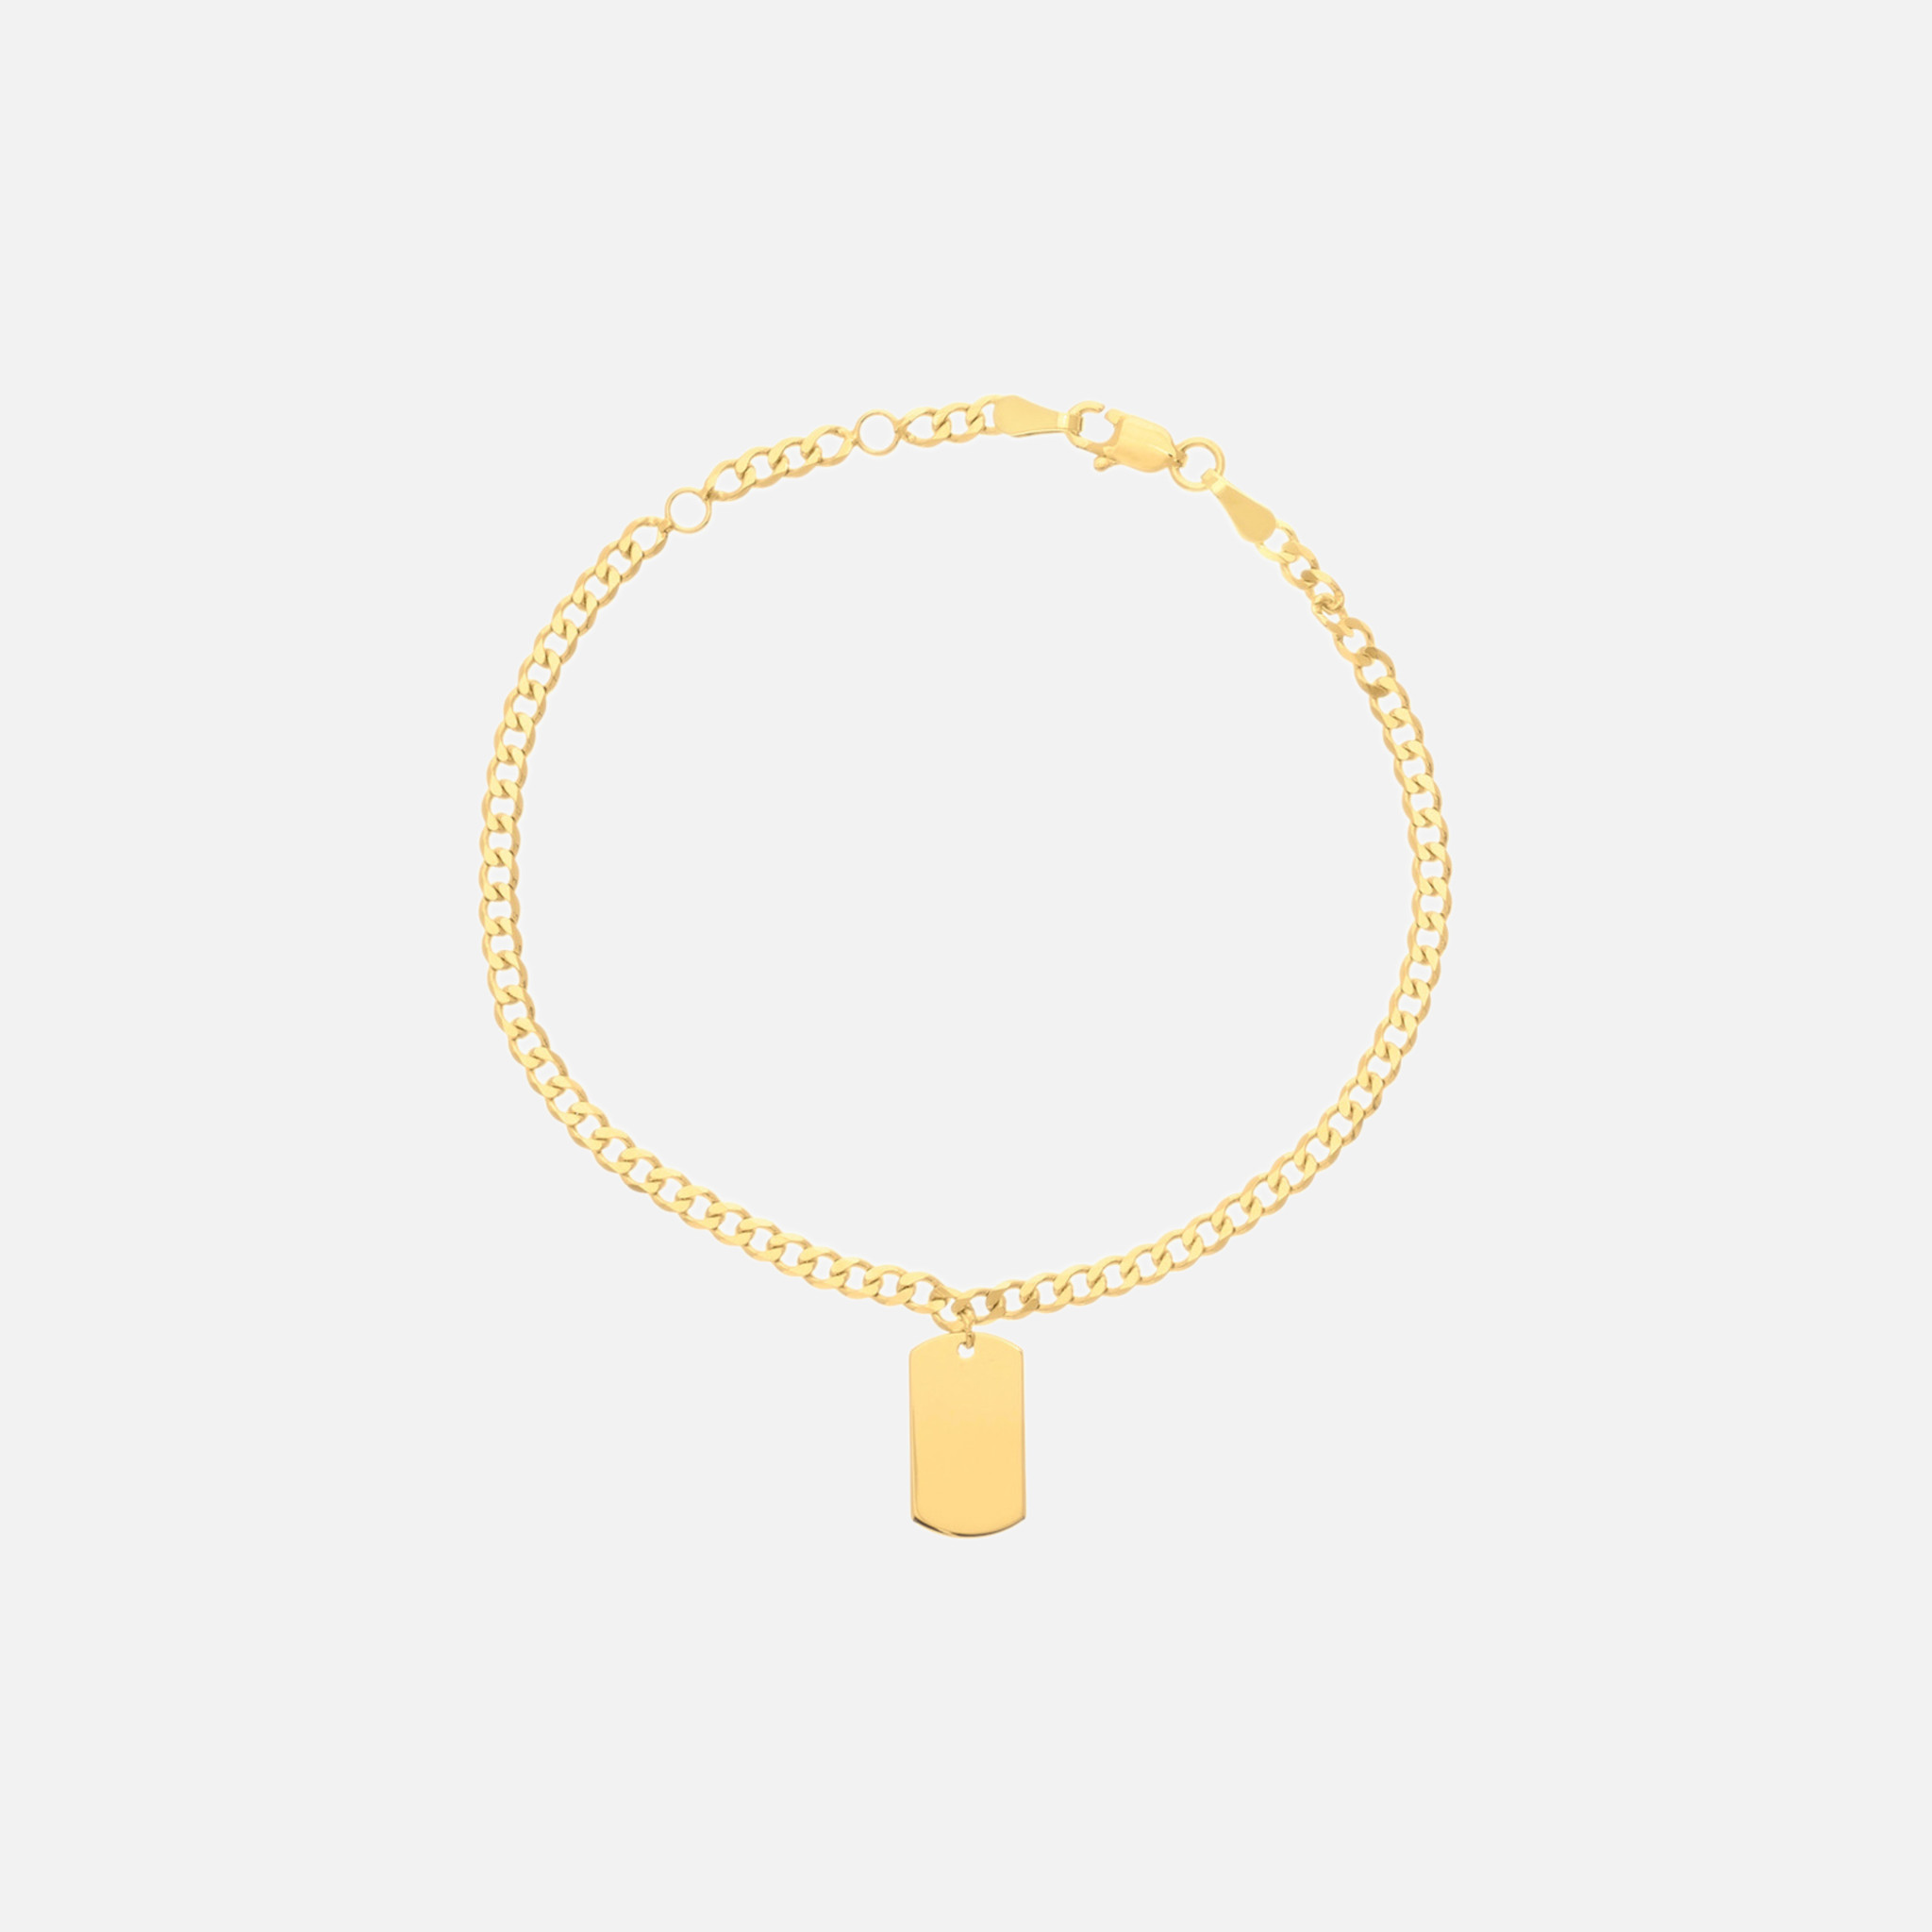 Handcrafted sleek 14k gold dog tag charm bracelet, a wardrobe hero that transcends seasons with its ultra-cute charm.